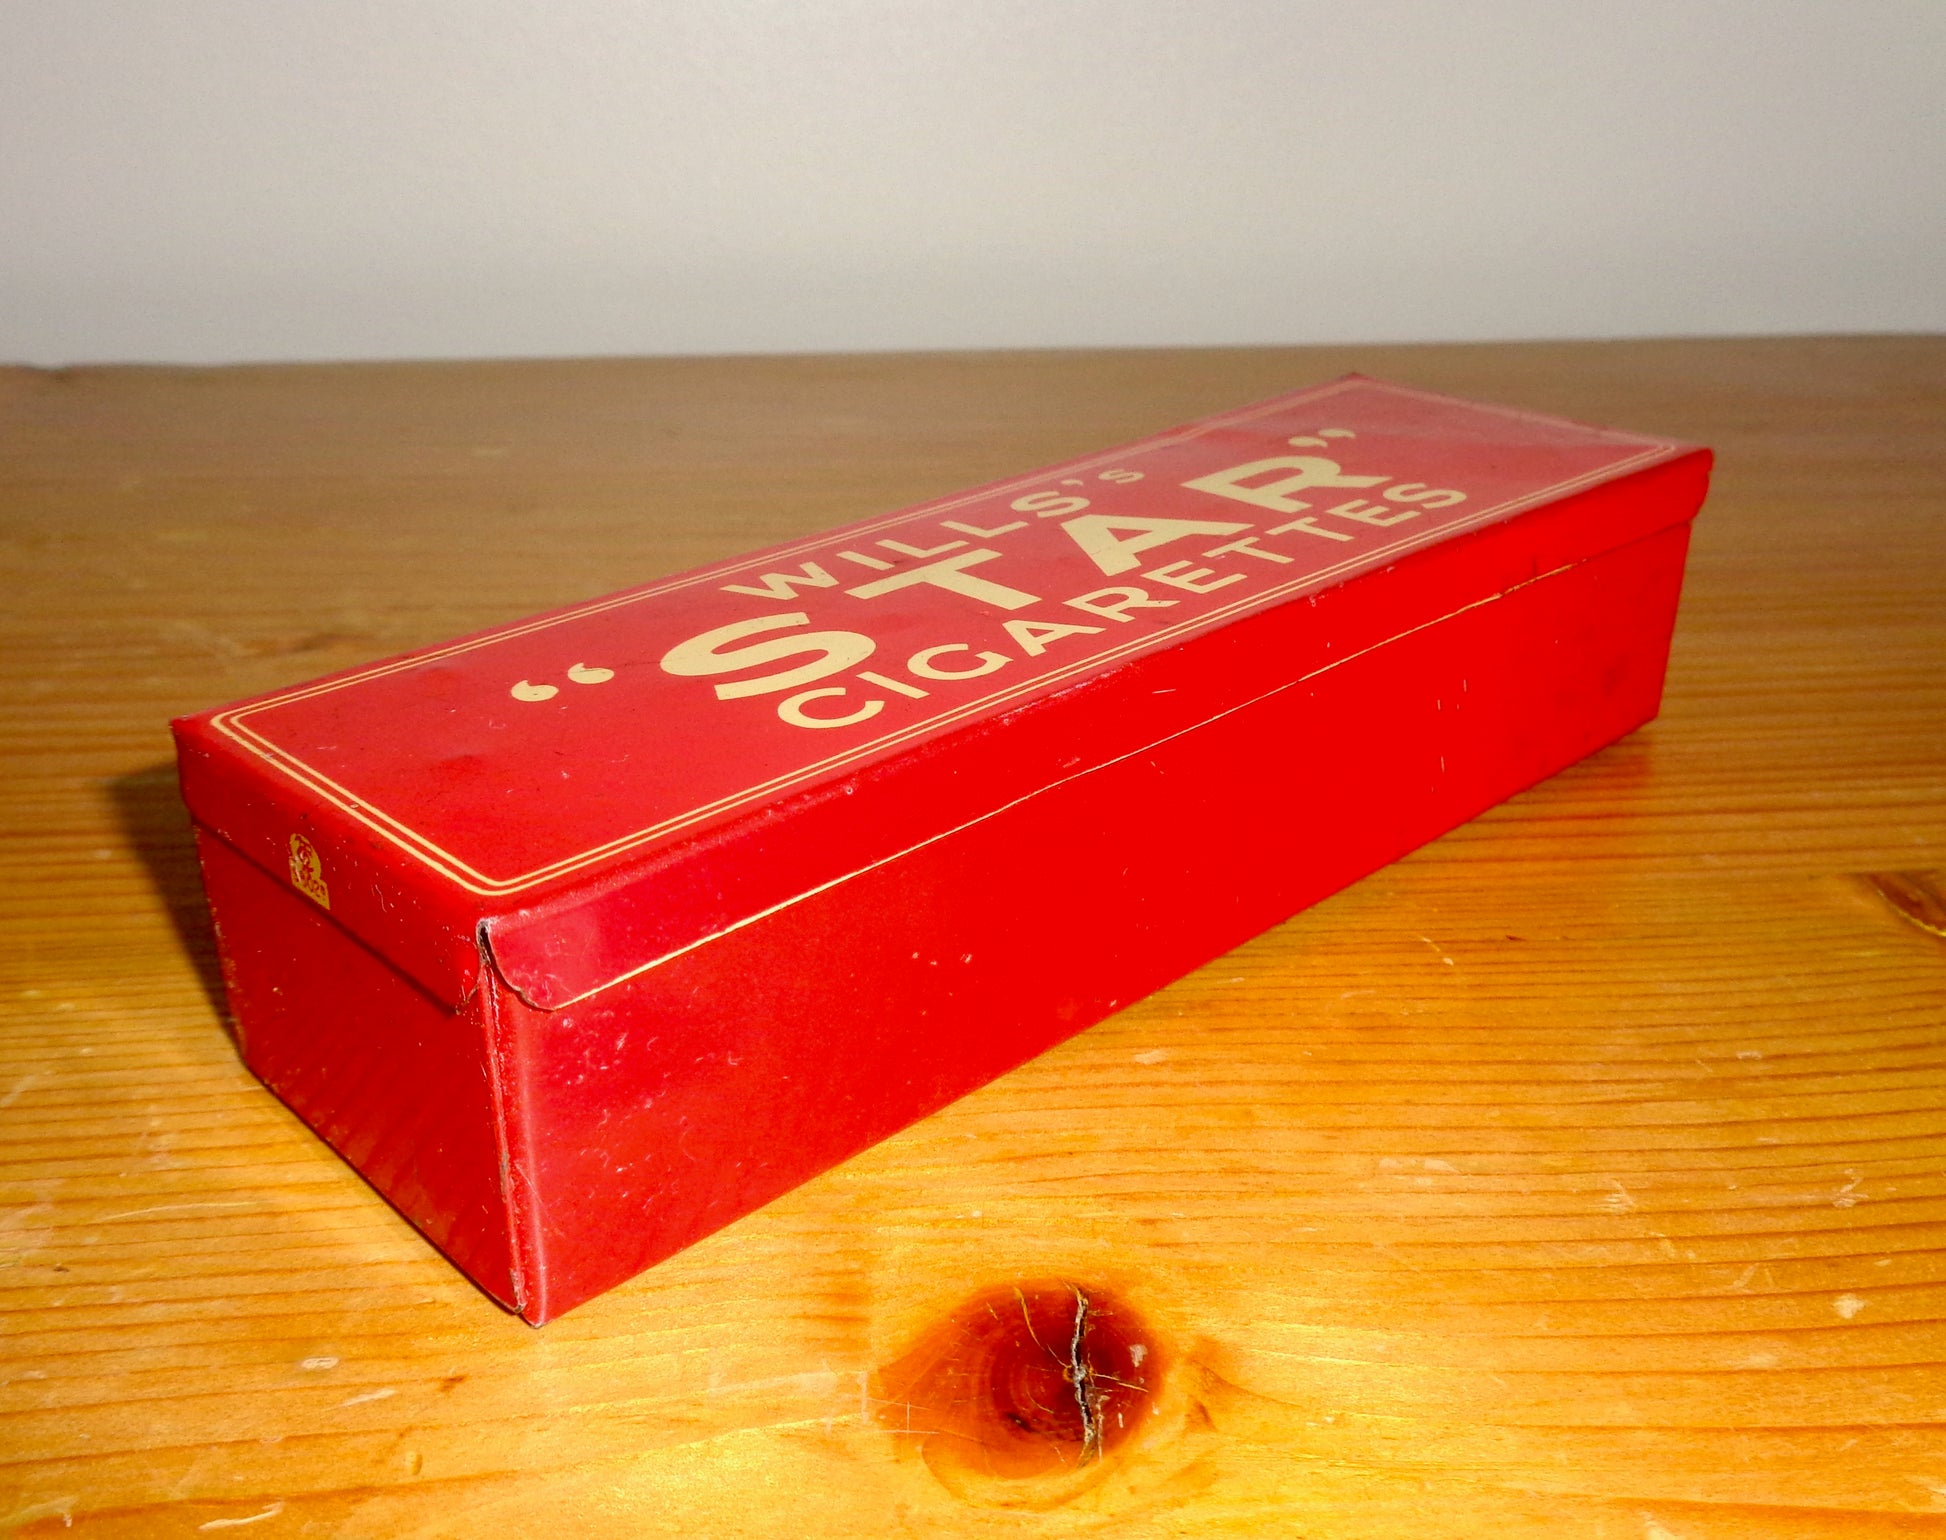 Wills's Star Cigarettes Boxed Tin Set of 28 Dominoes In Black Crystalate